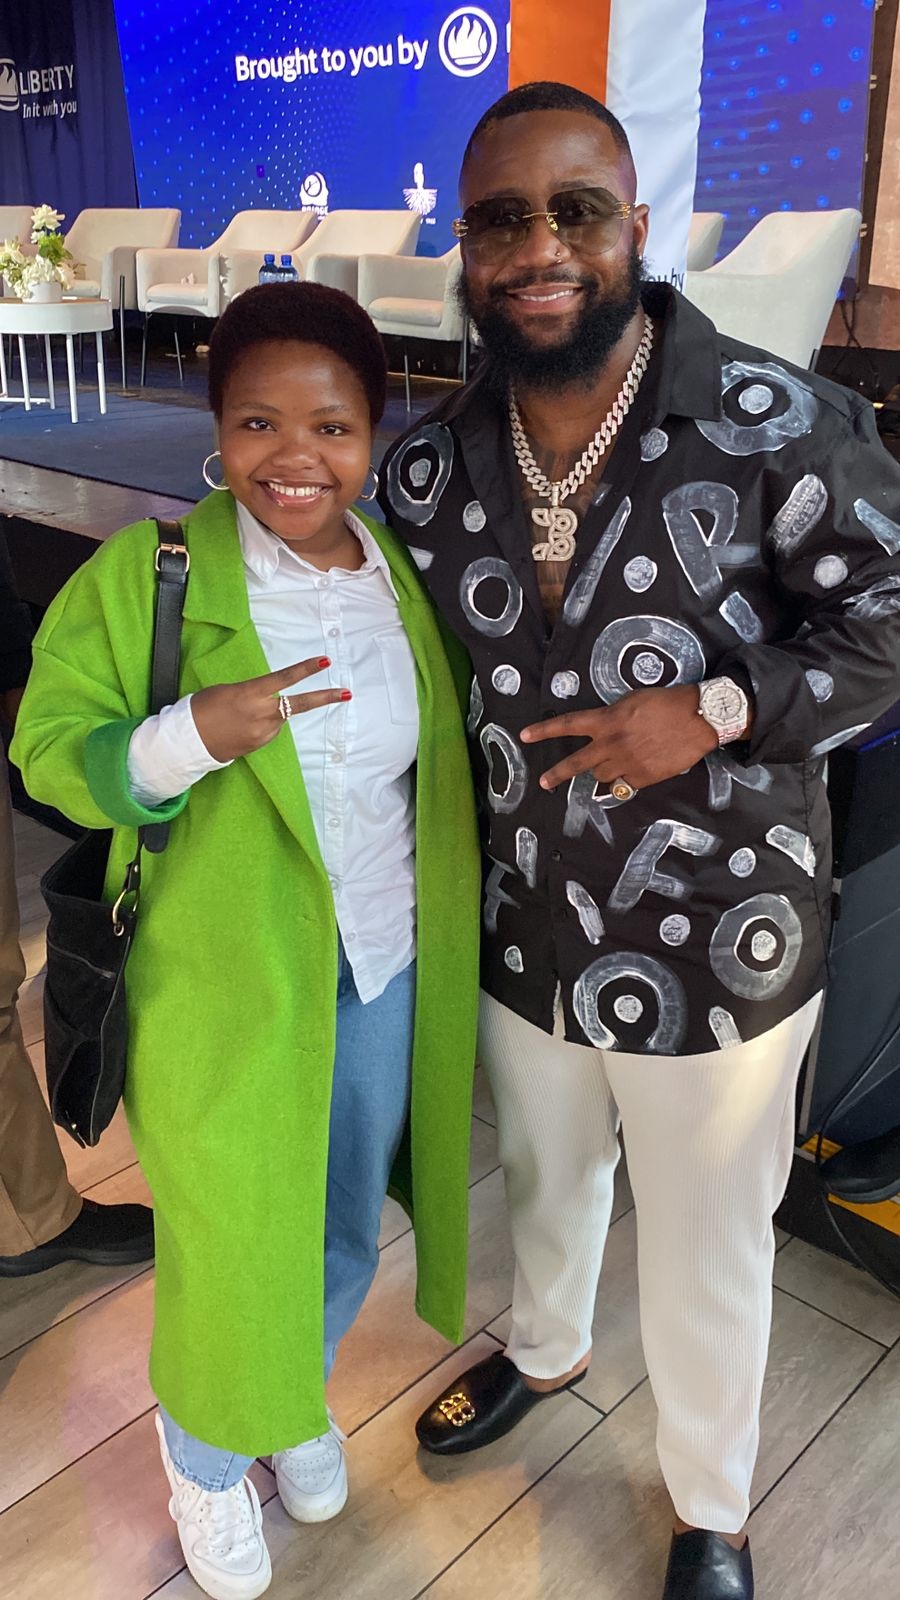 Unathi Sithole and Cassper Nyovest during secure t